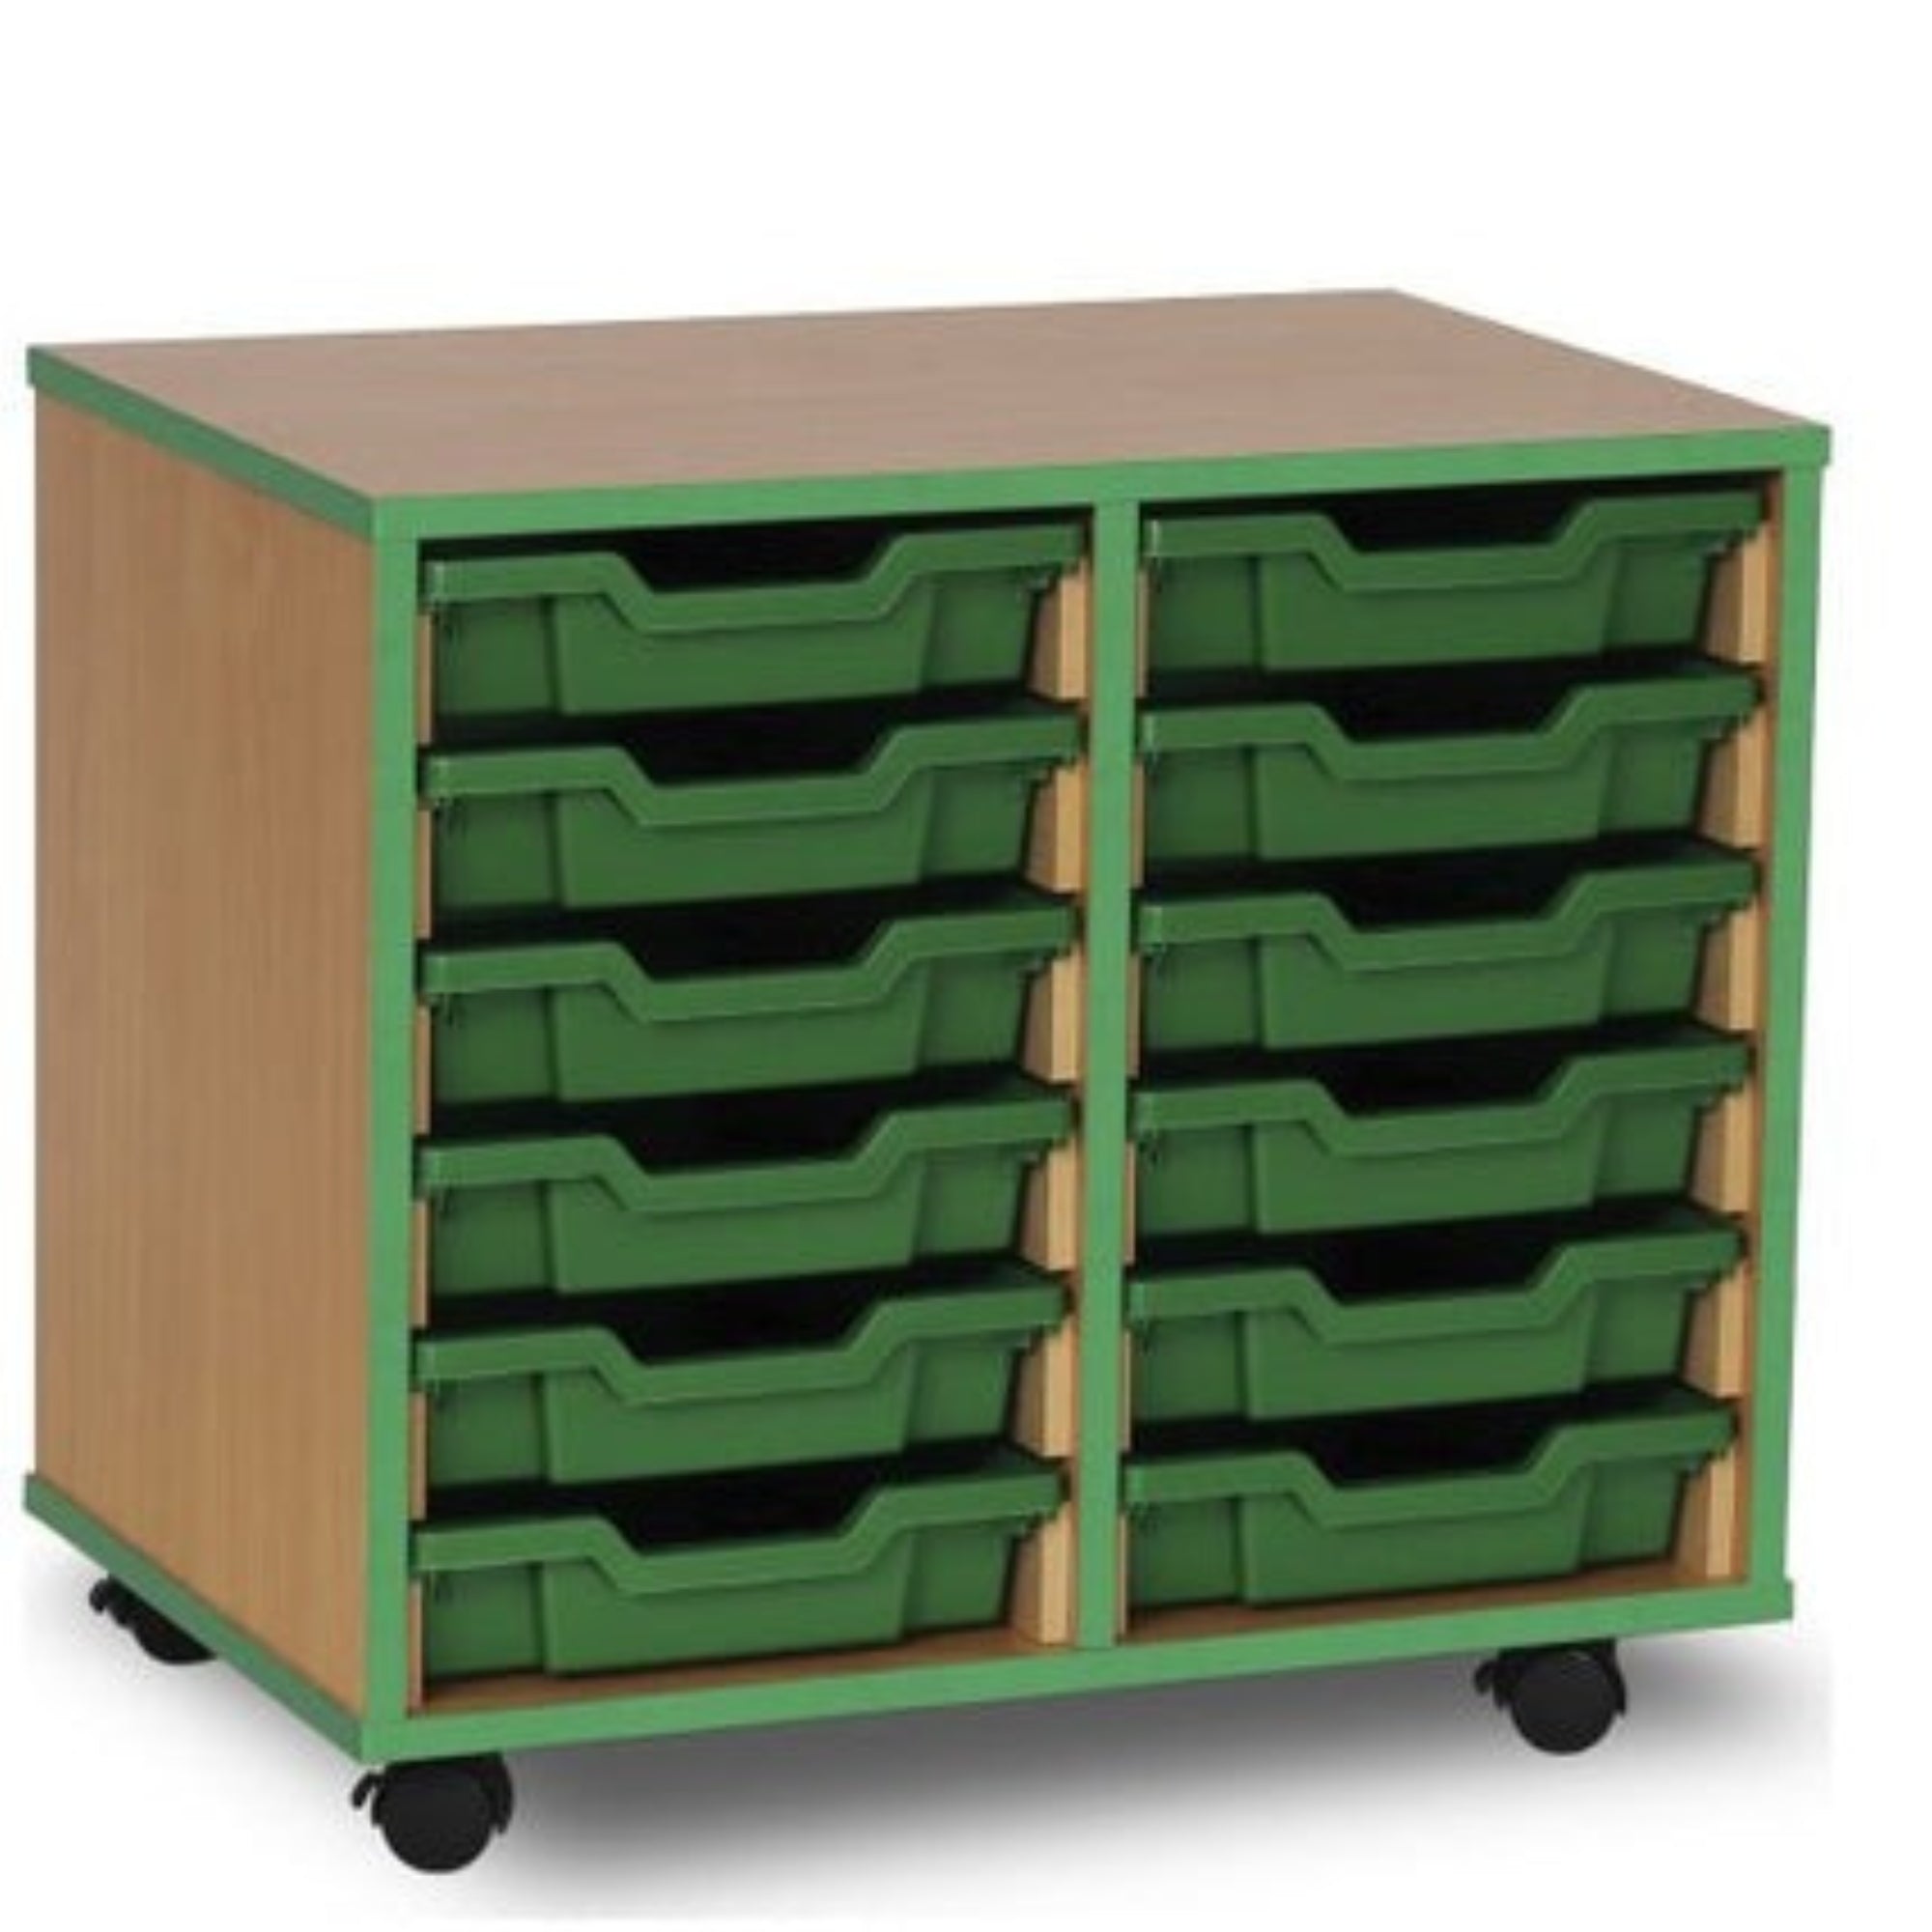 12 Shallow Tray Storage Unit With Coloured Edge, The 12 shallow tray storage unit with coloured edge is the perfect storage solution for any educational environment. This unit is versatile and can be used to store books, stationery, and toys. The unit is crafted from 18mm MFC (melamine faced chipboard) with 2mm ABS edging to ensure robustness and durability. This tray storage unit features a double column design which allows for easy organization and storage of all your essentials. The unit comes complete w